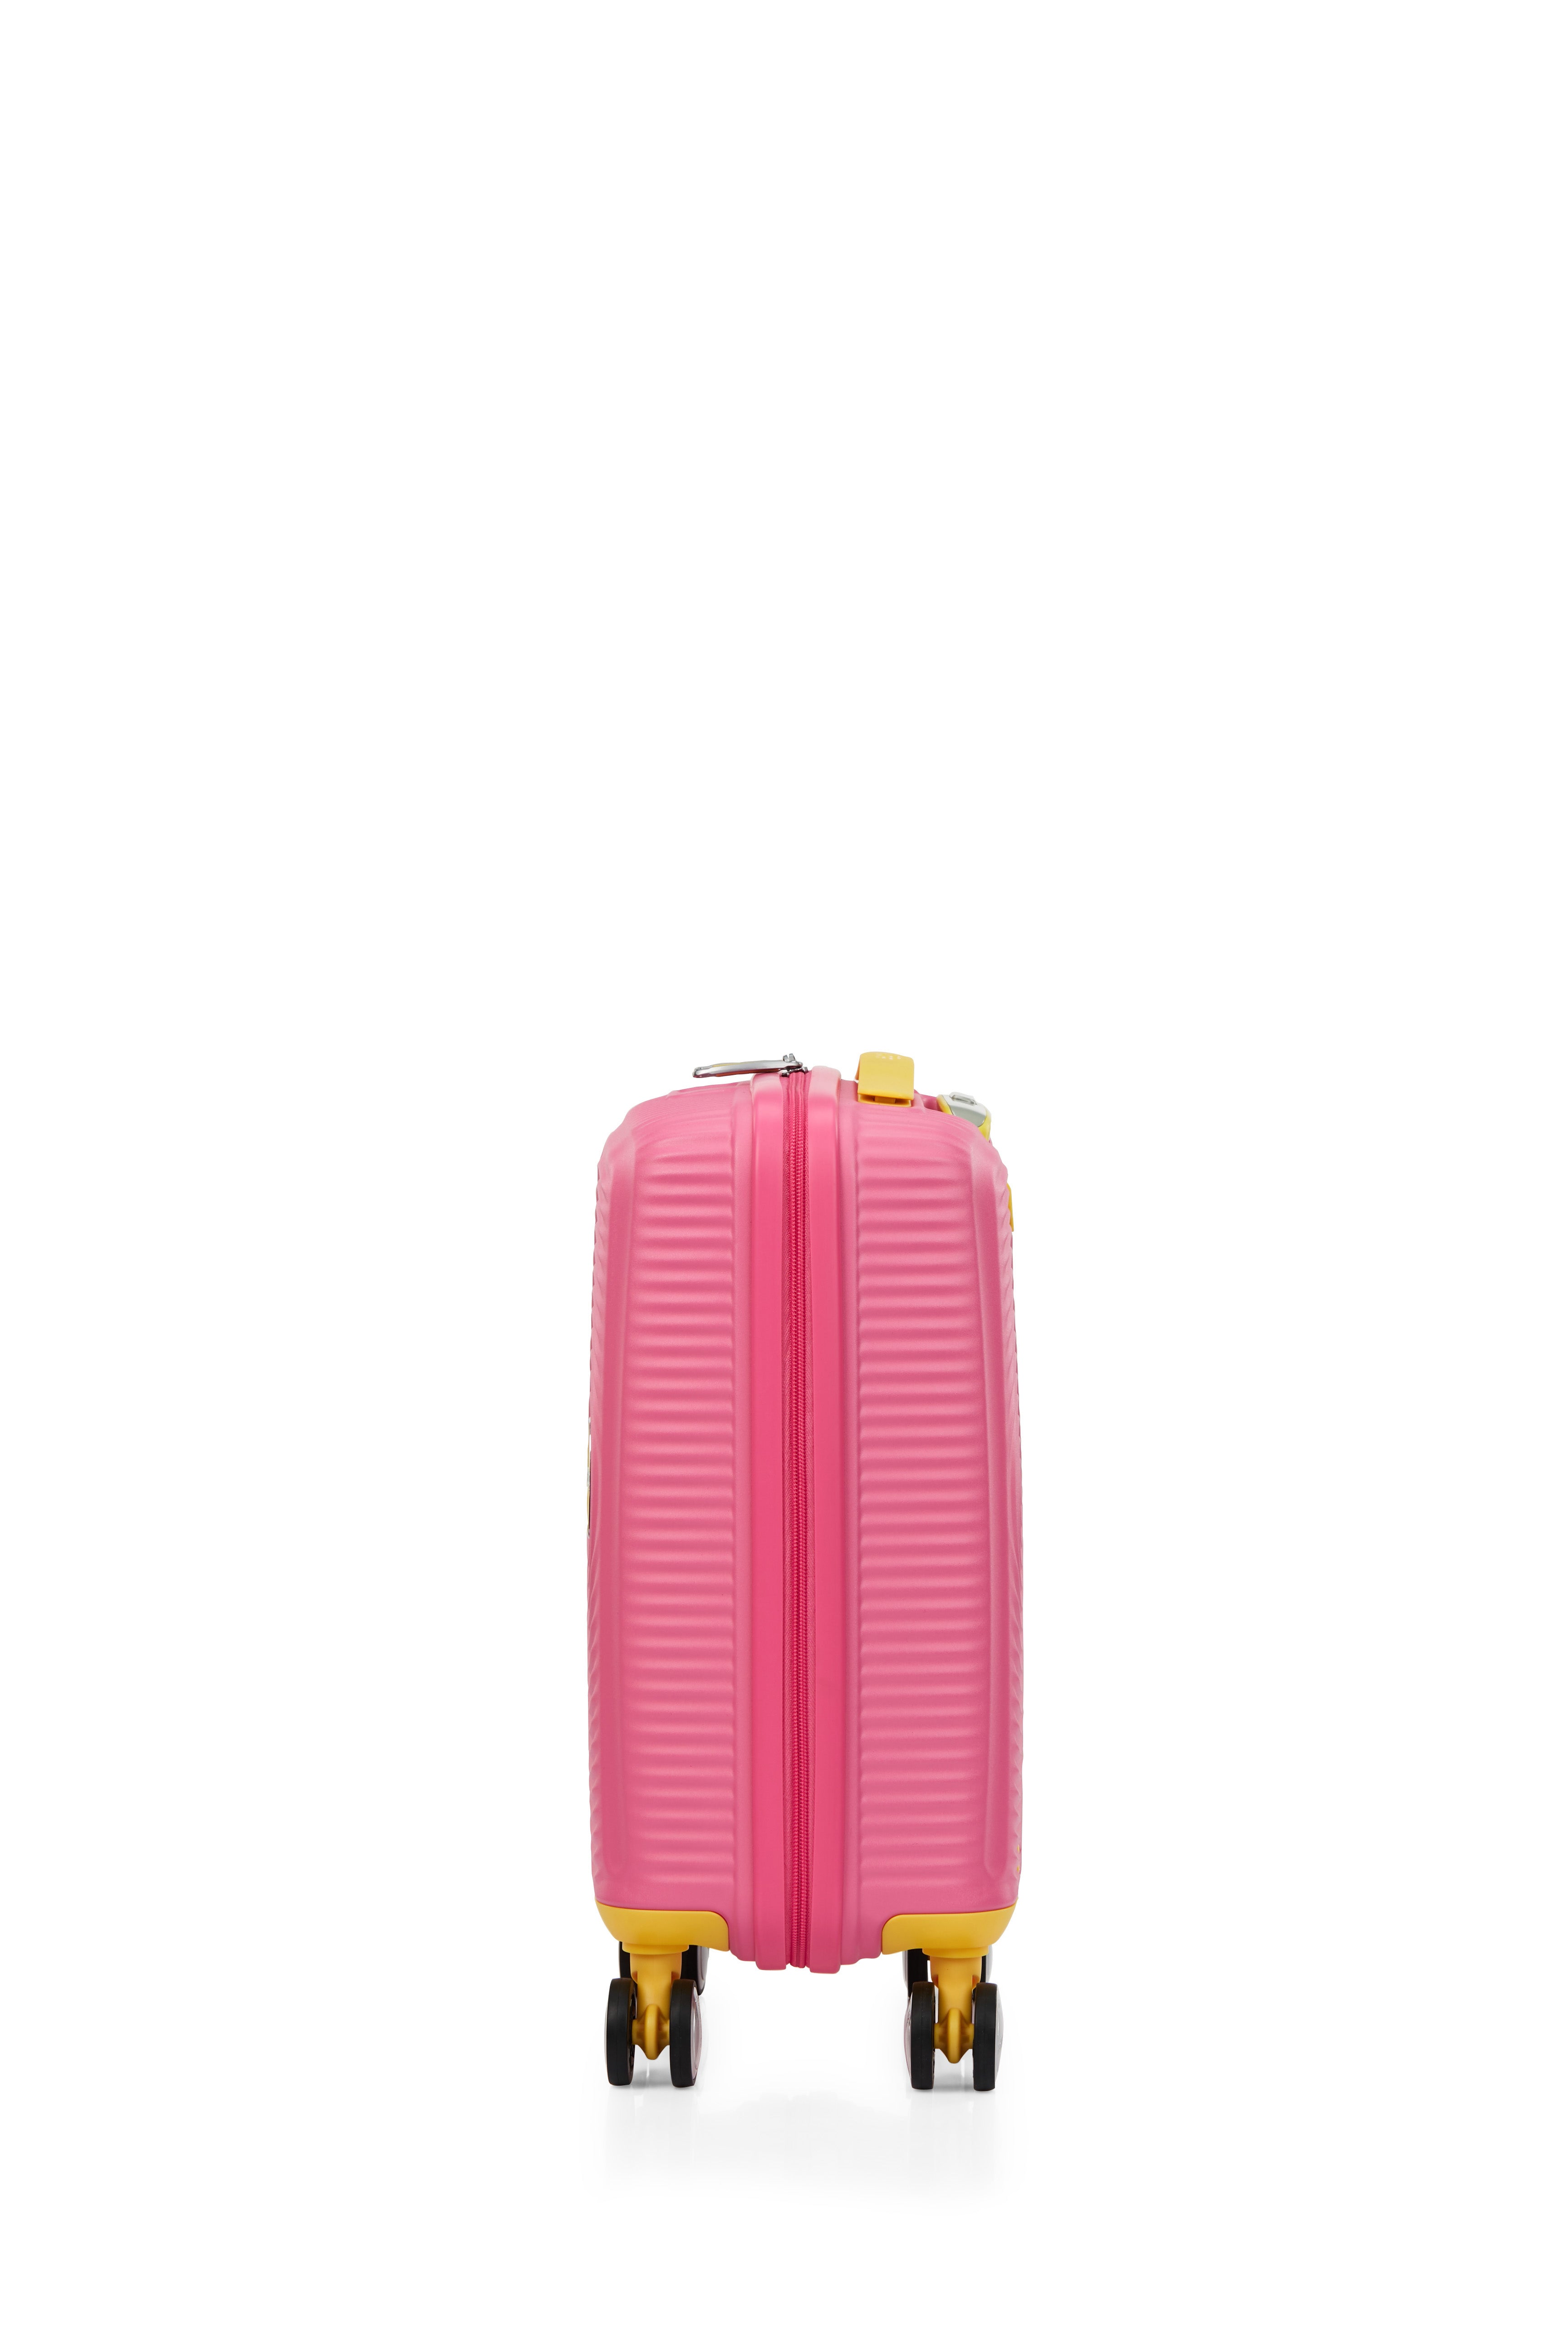 American Tourister - Little Curio 47cm Spinner - Pink/Yellow-3